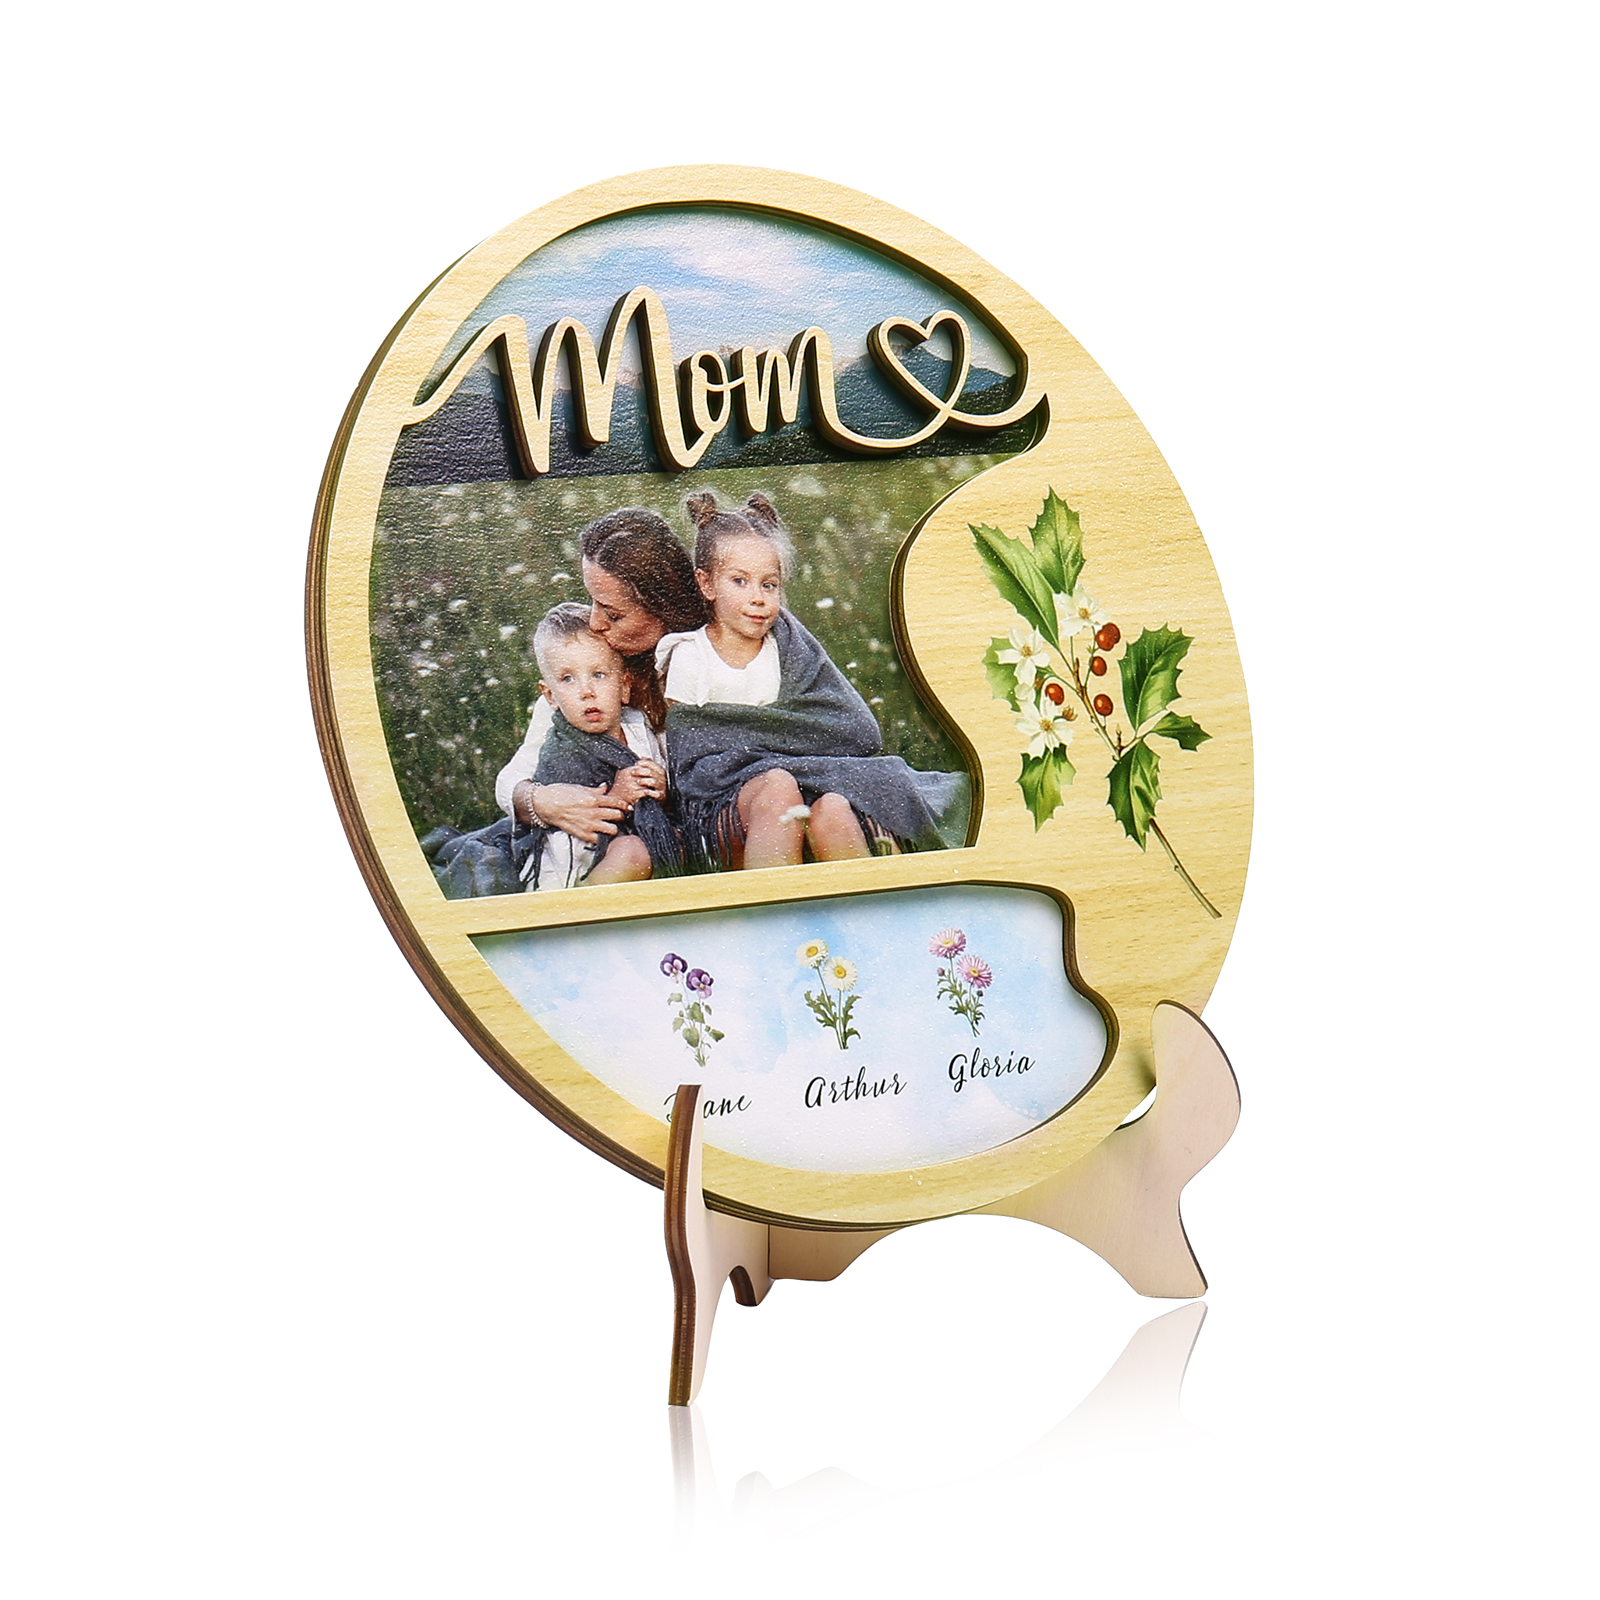 3 Names - Customized Photo Birthday Flowers and Text Wooden Ornaments for Mom/Grandma